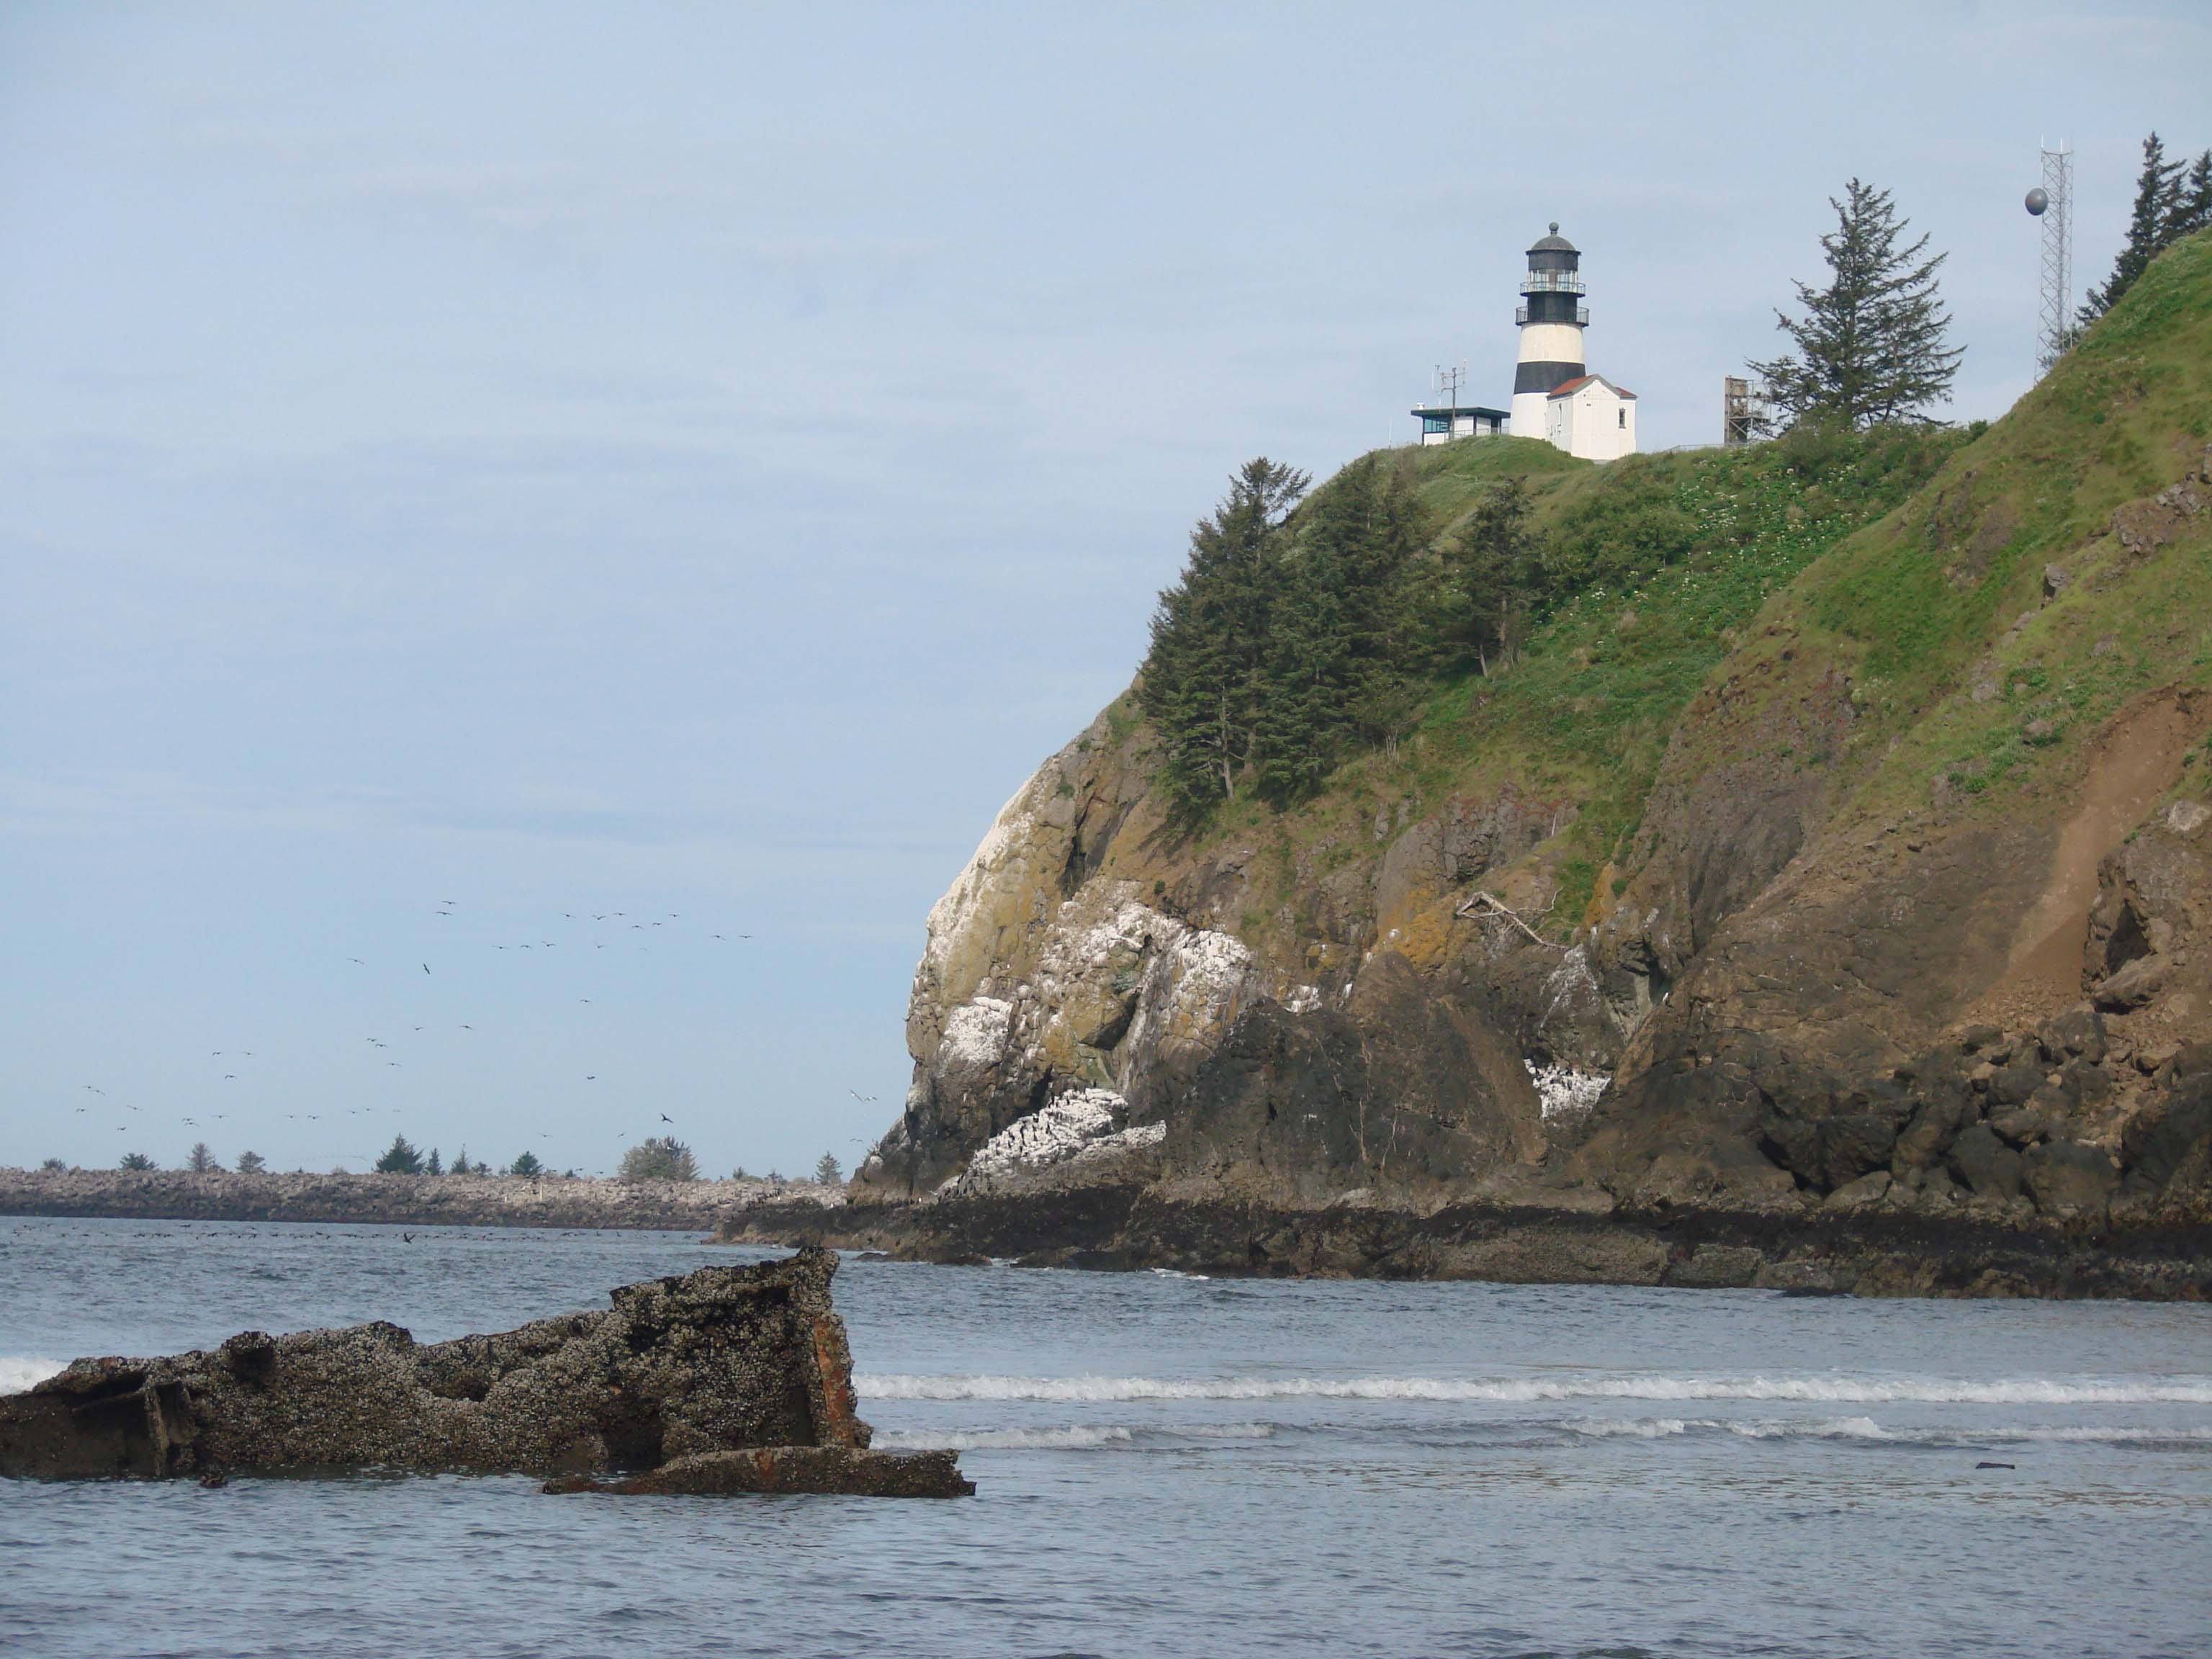 If you look south at low tide from Cape Disappointment Lighthouse, you can see the slowly shrinking remains of the lumber barge, George Olson.